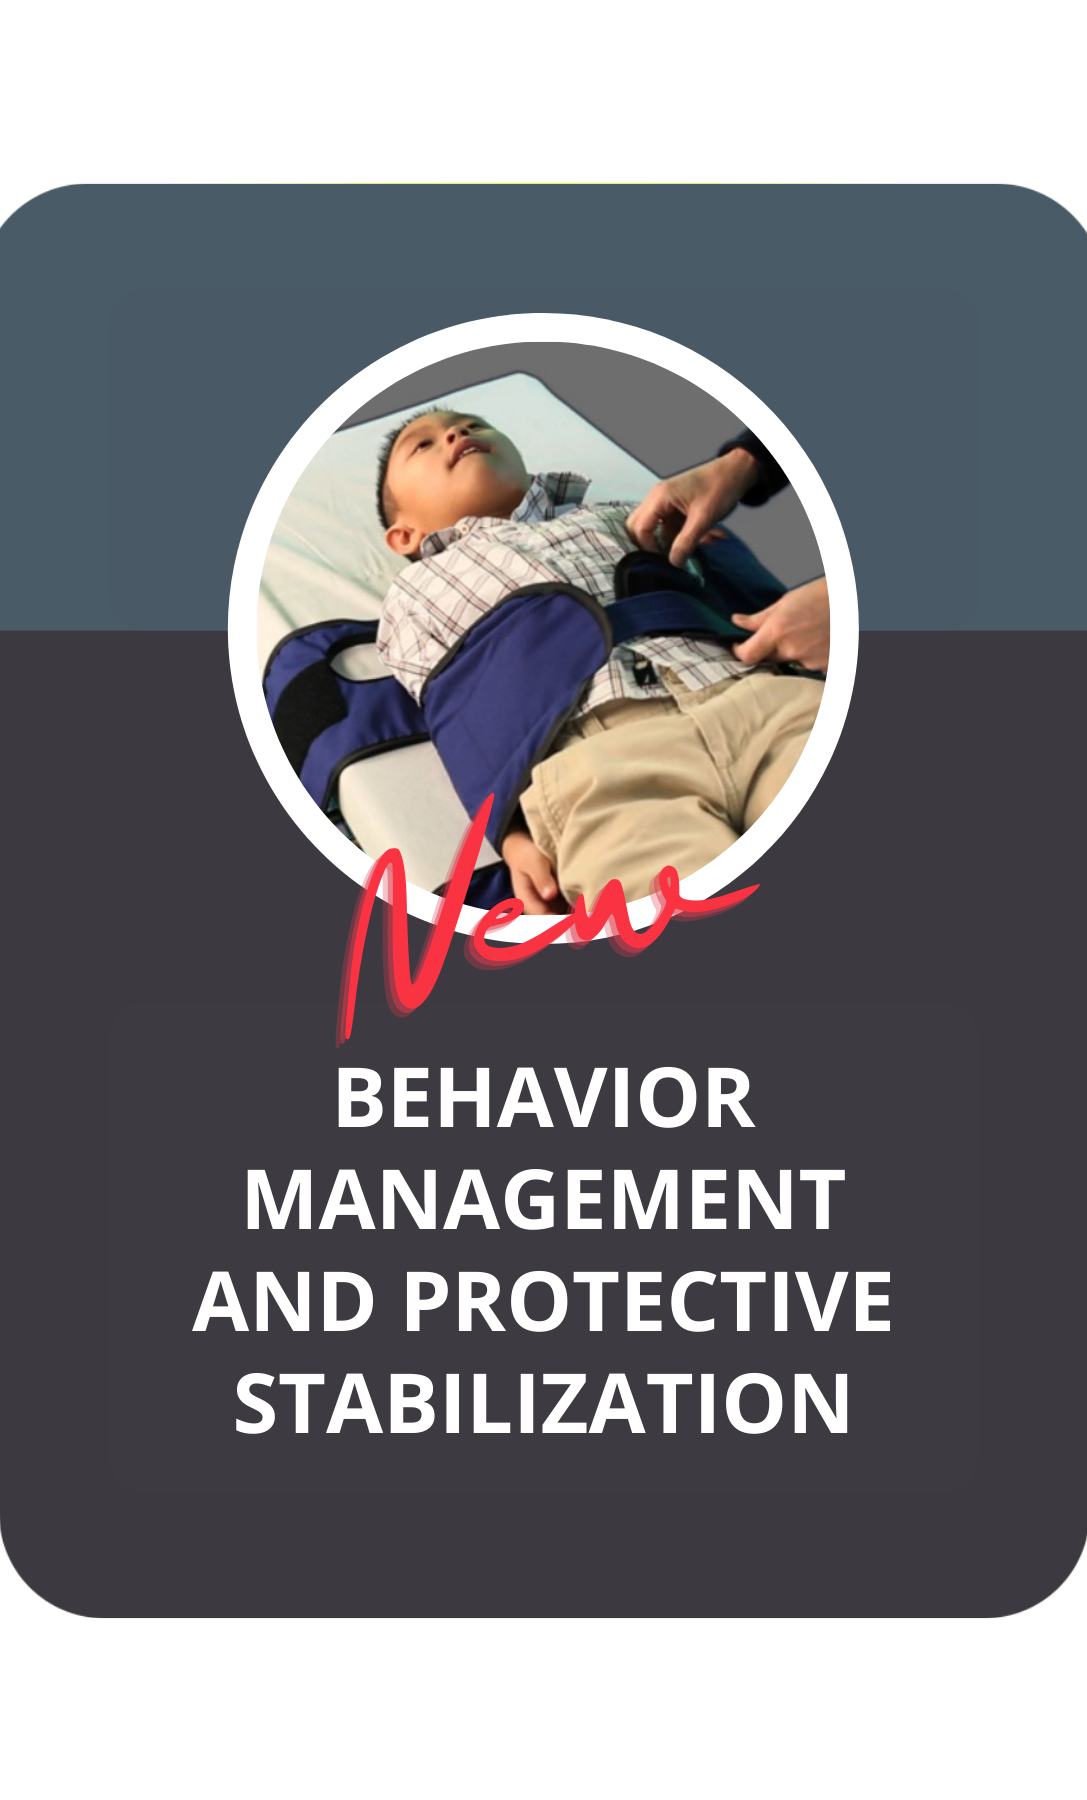 PROTECTIVE STABILIZATION AND BEHAVIOR MANAGEMENT